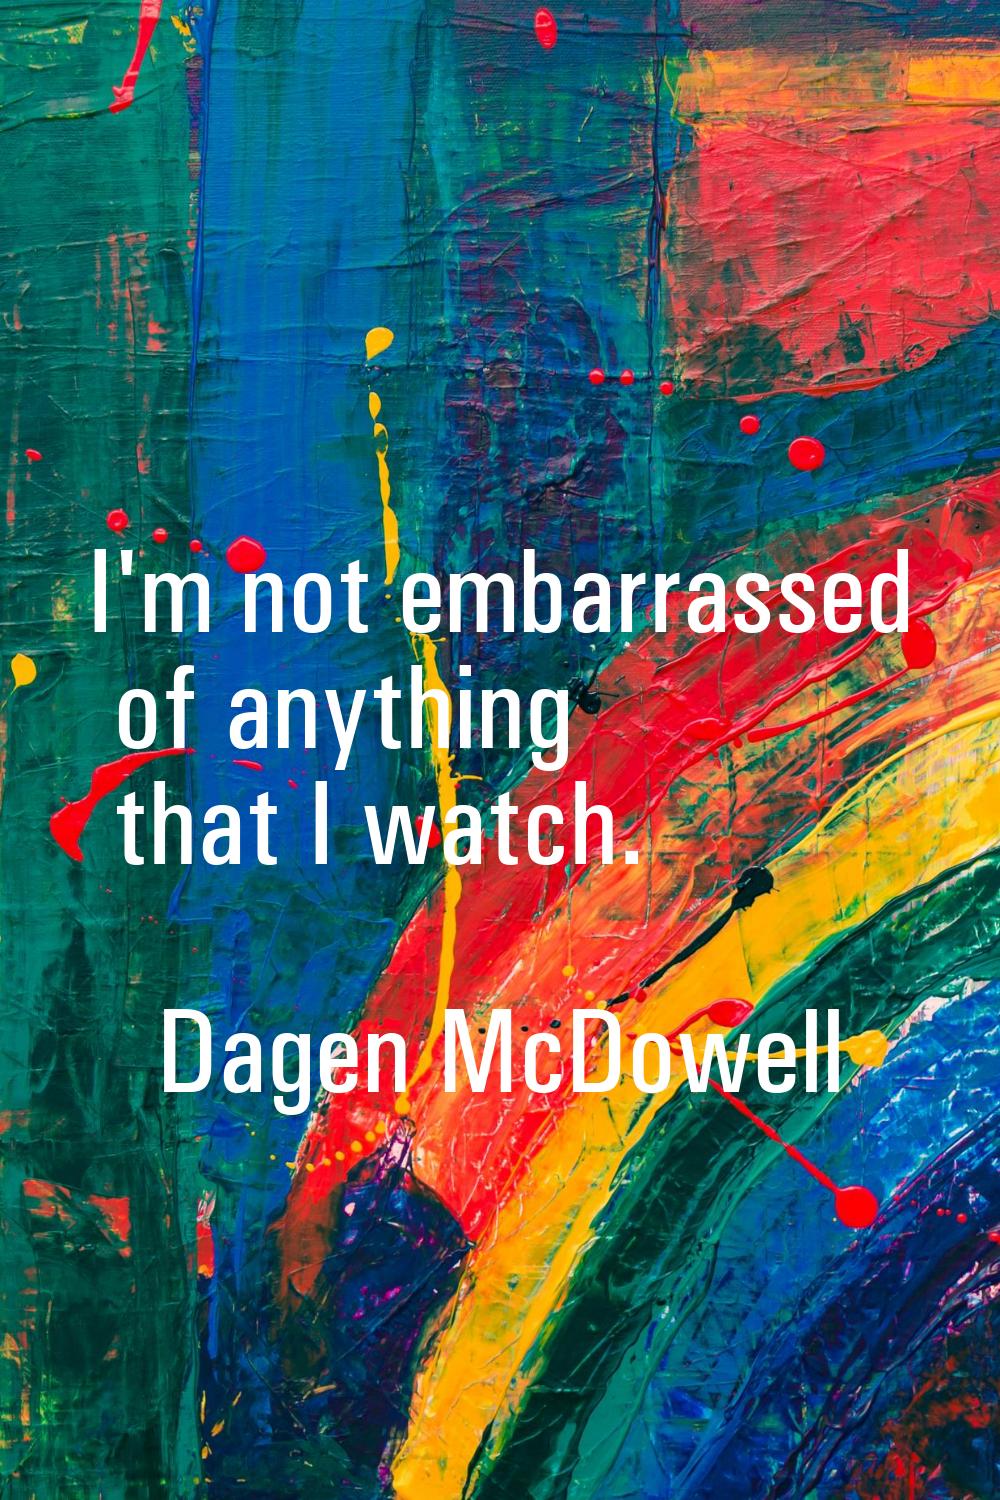 I'm not embarrassed of anything that I watch.